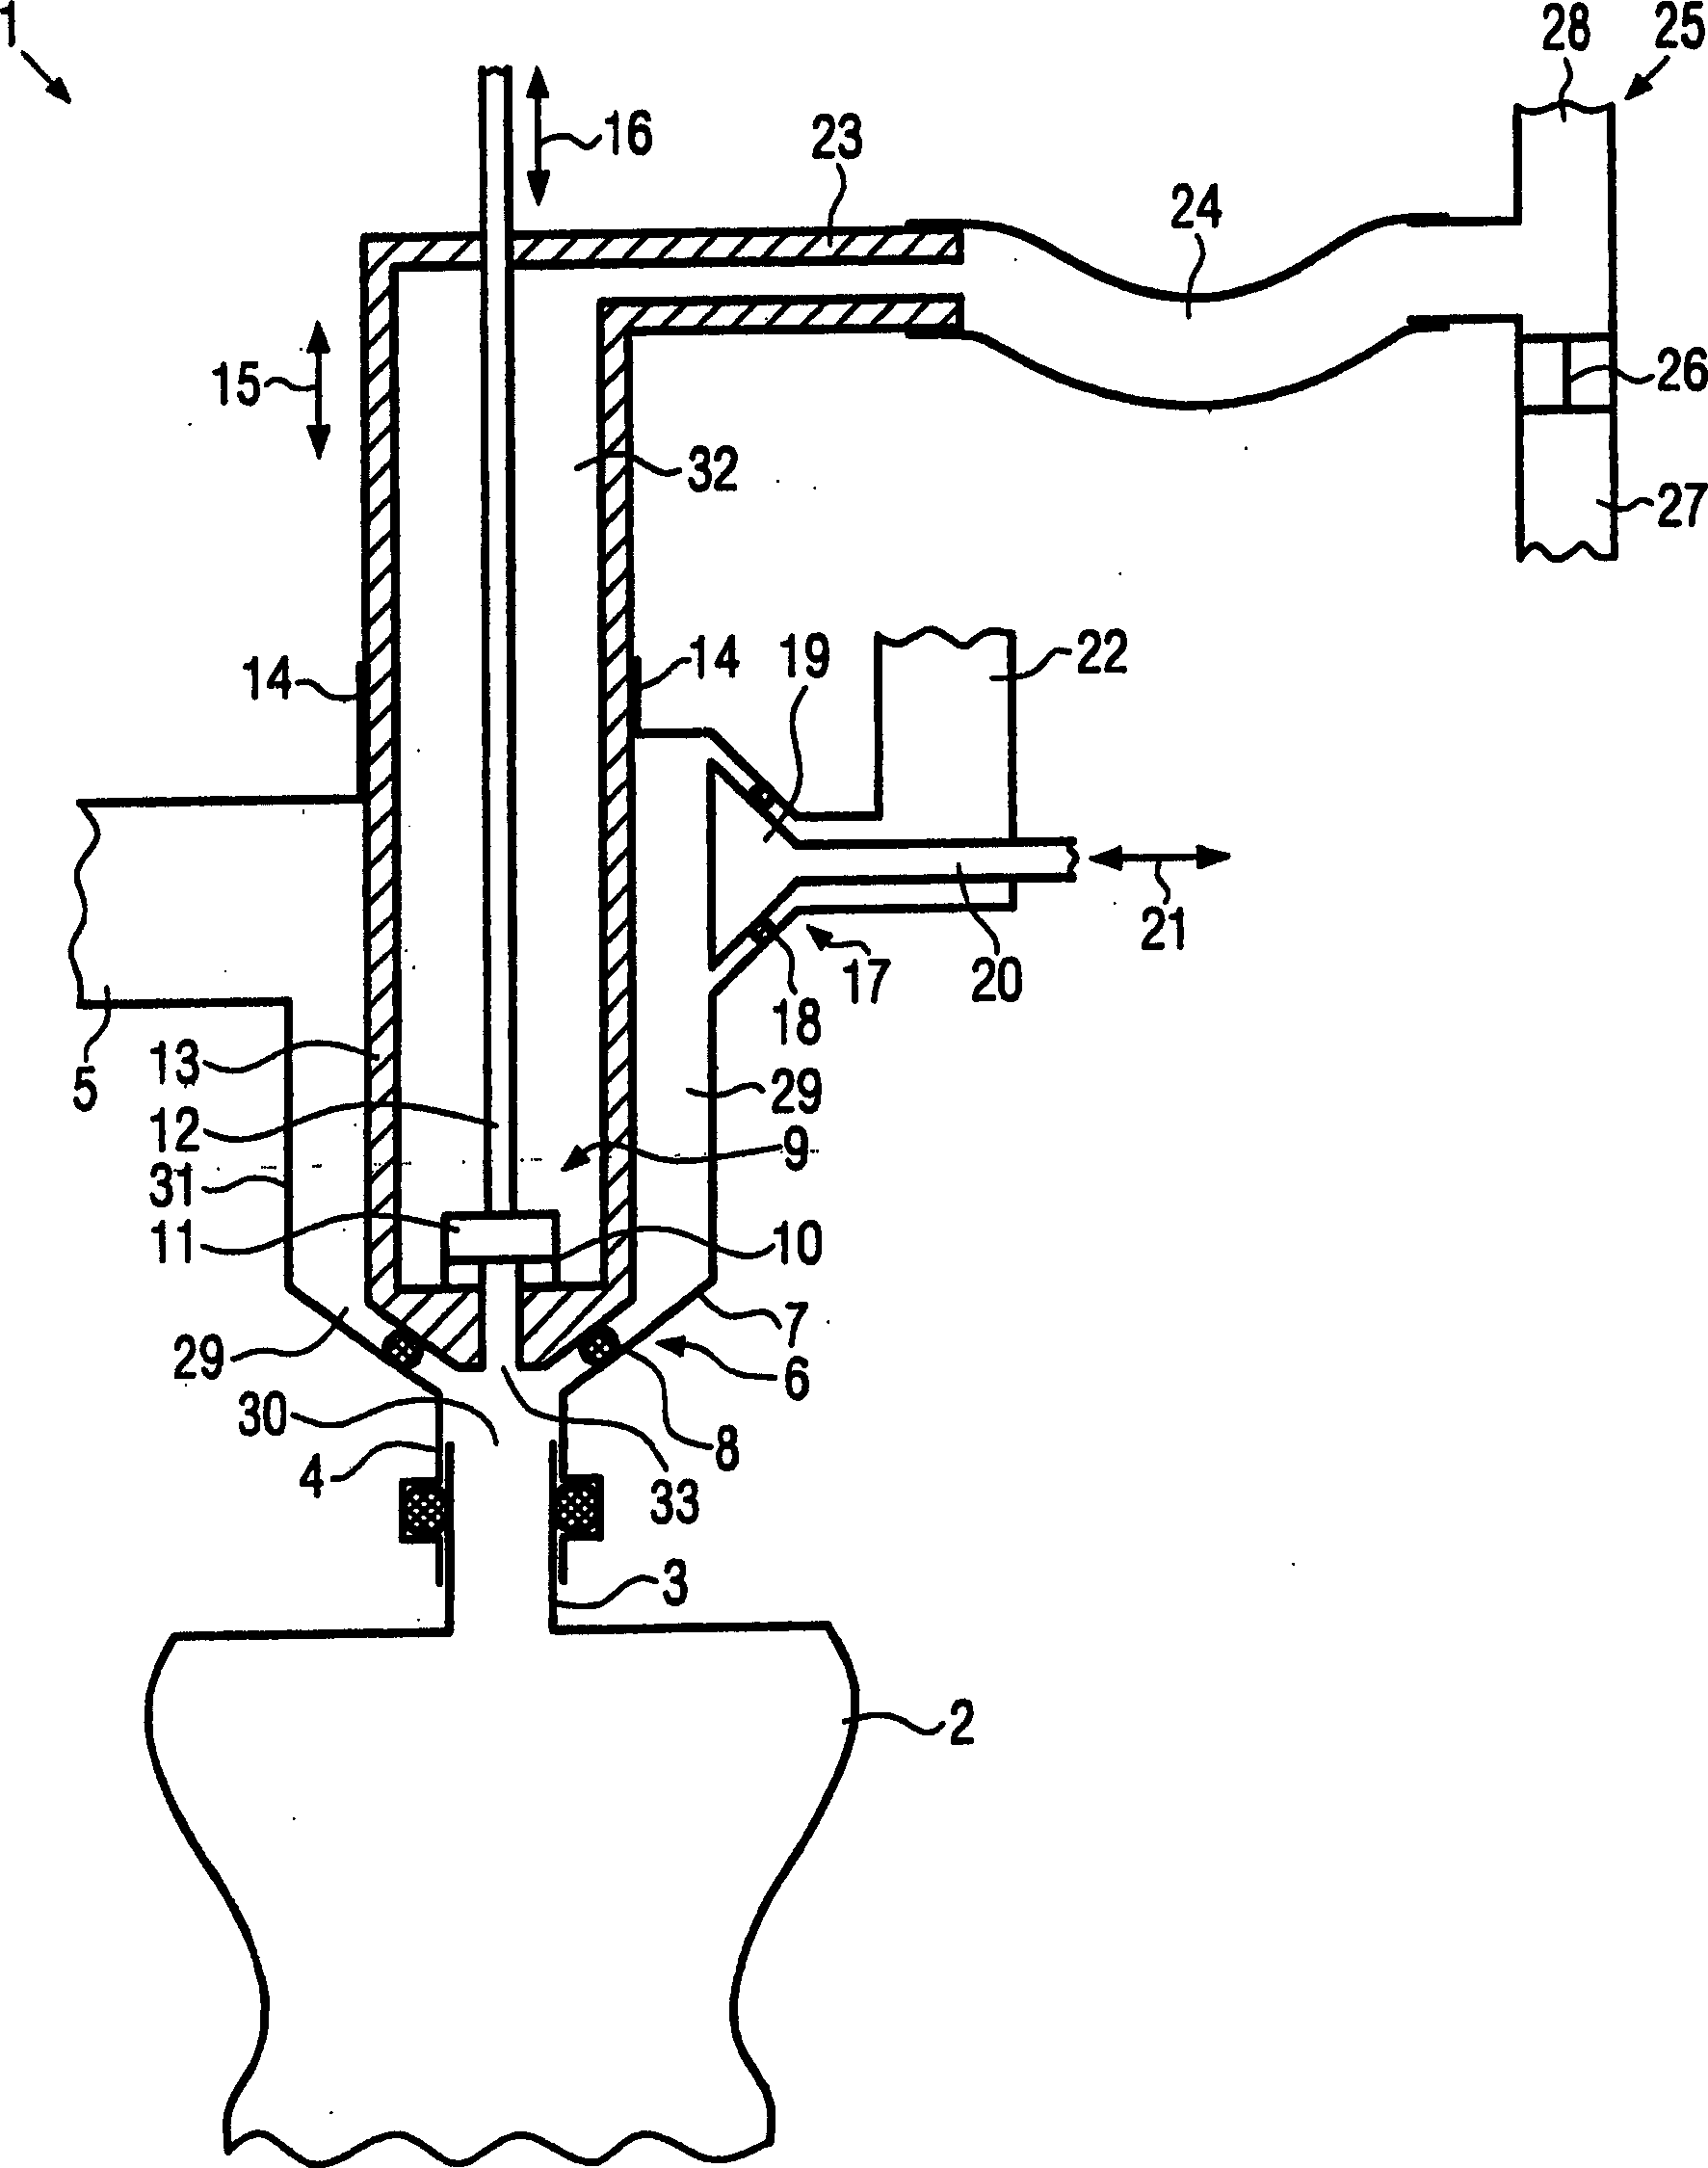 Method and apparatus for filling liquids into foil bags with a spout